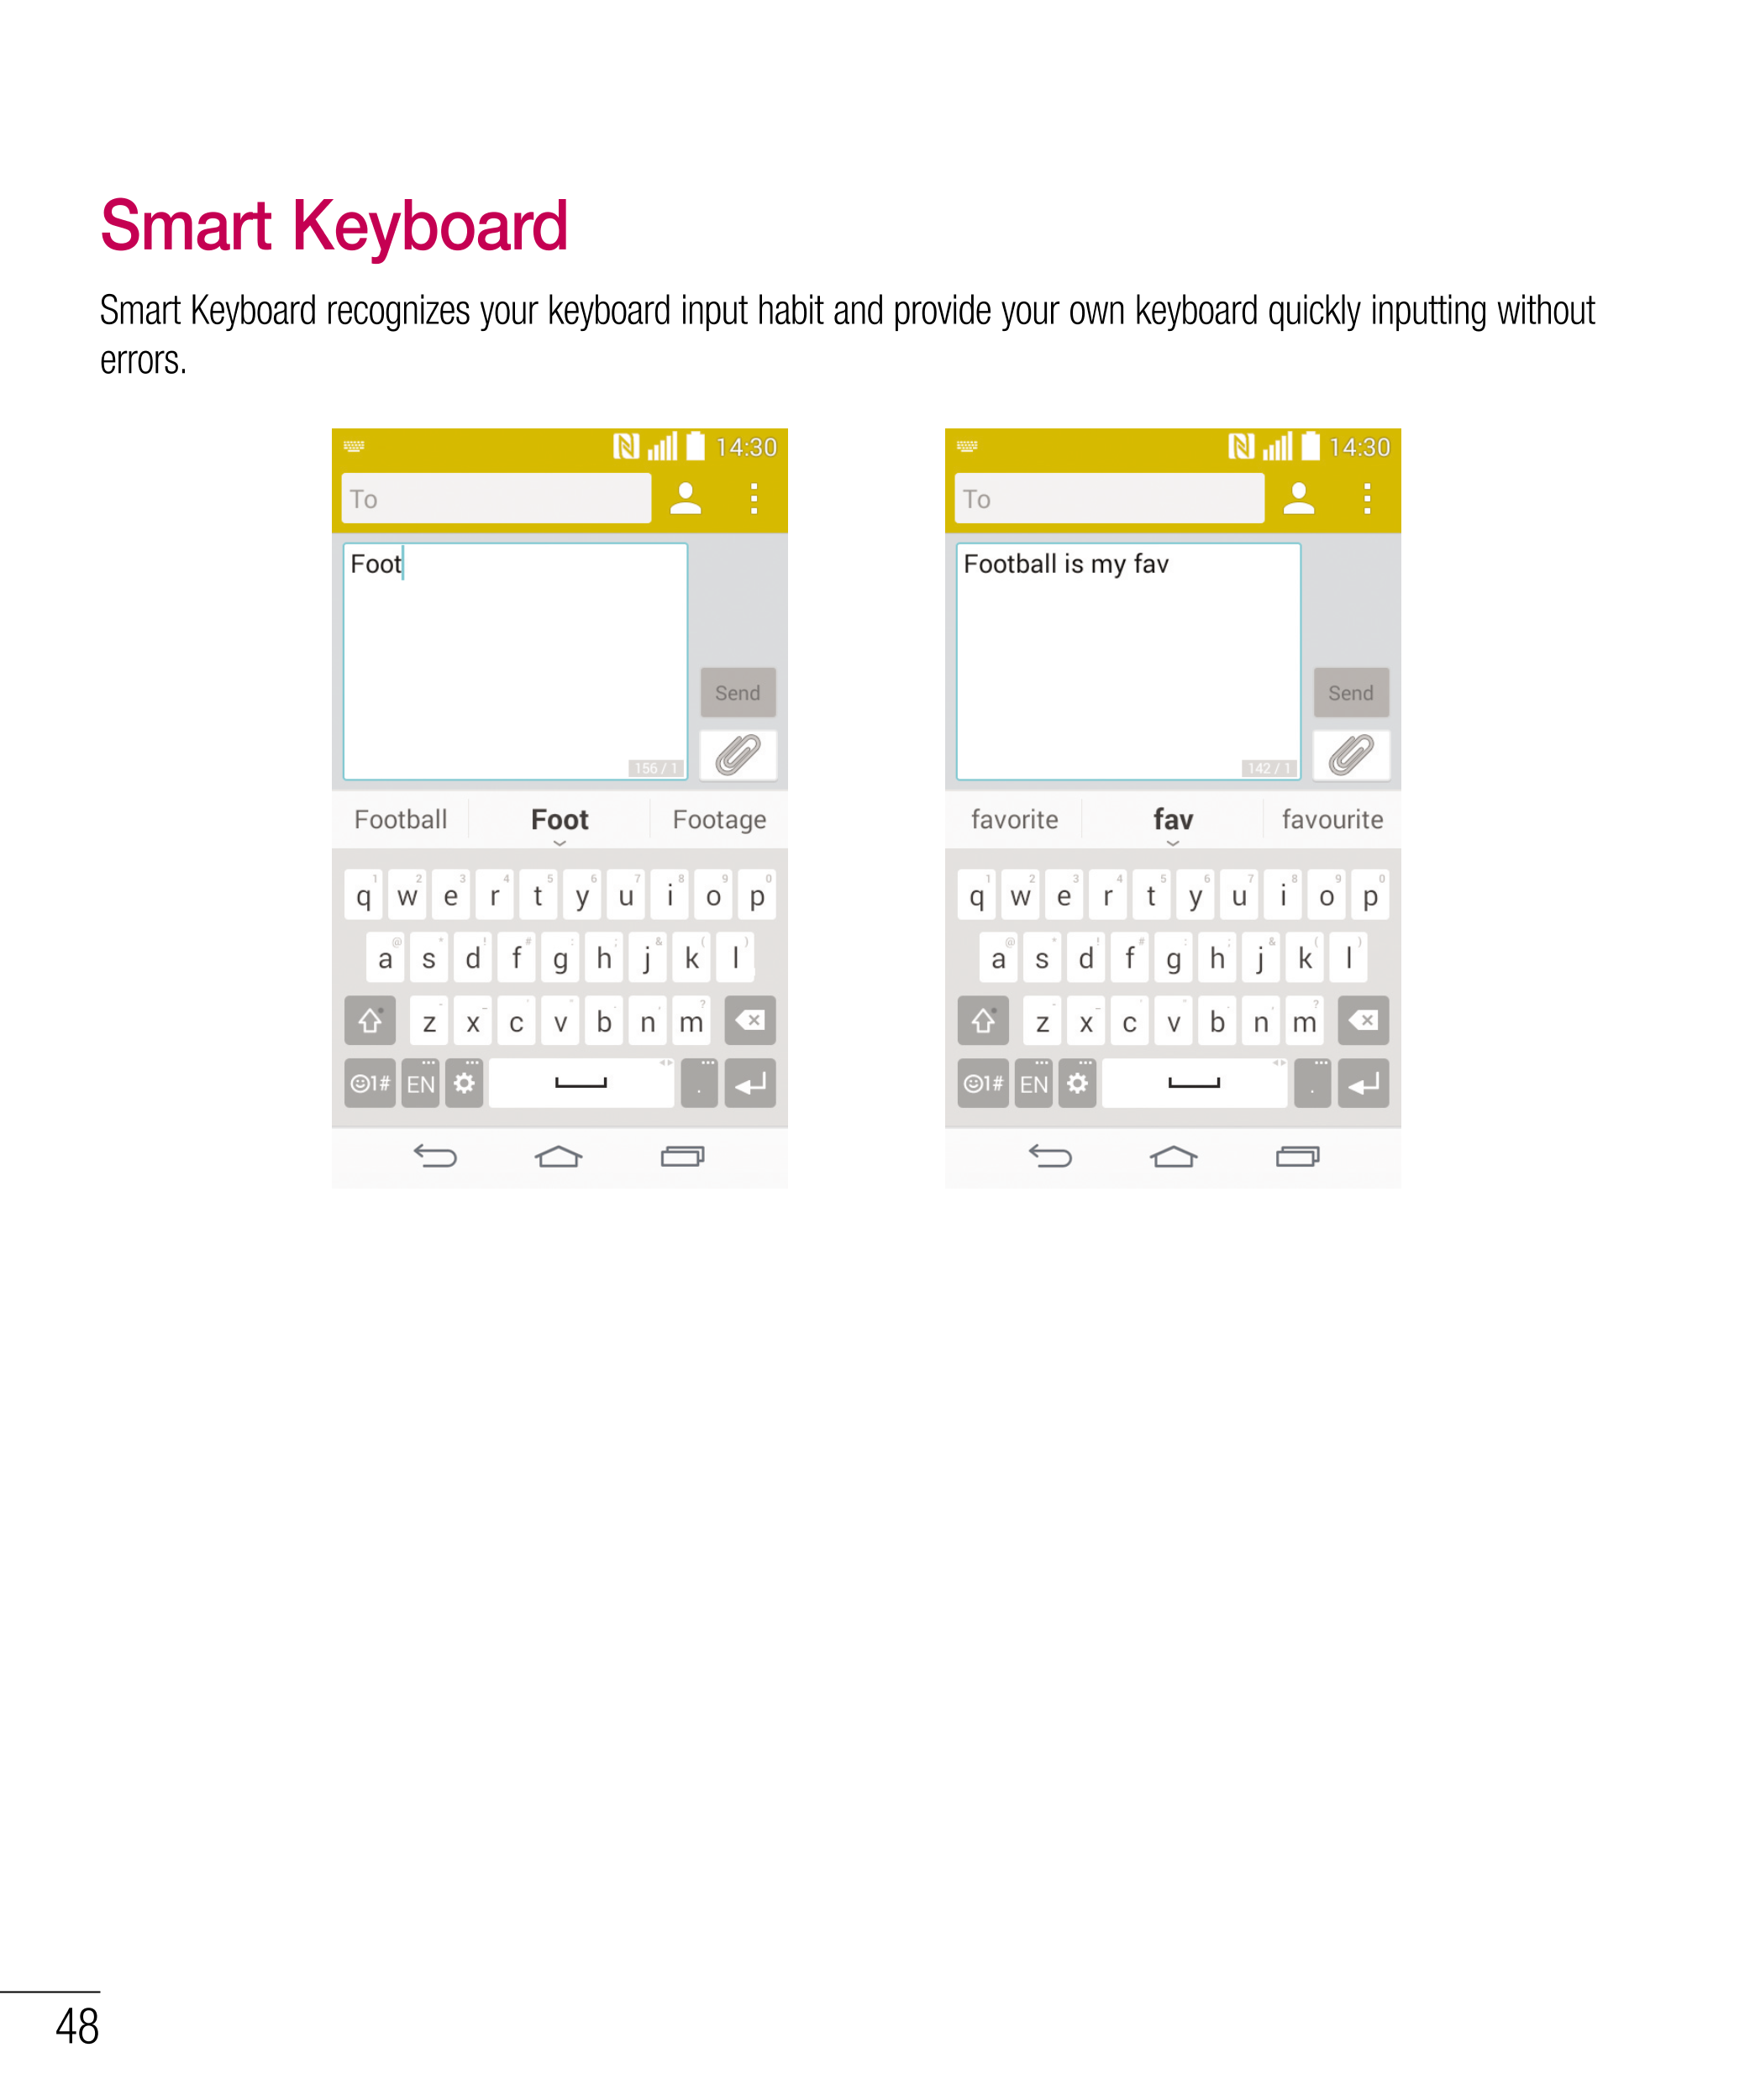 Smart Keyboard
Smart Keyboard recognizes your keyboard input habit and provide your own keyboard quickly inputting without 
erro